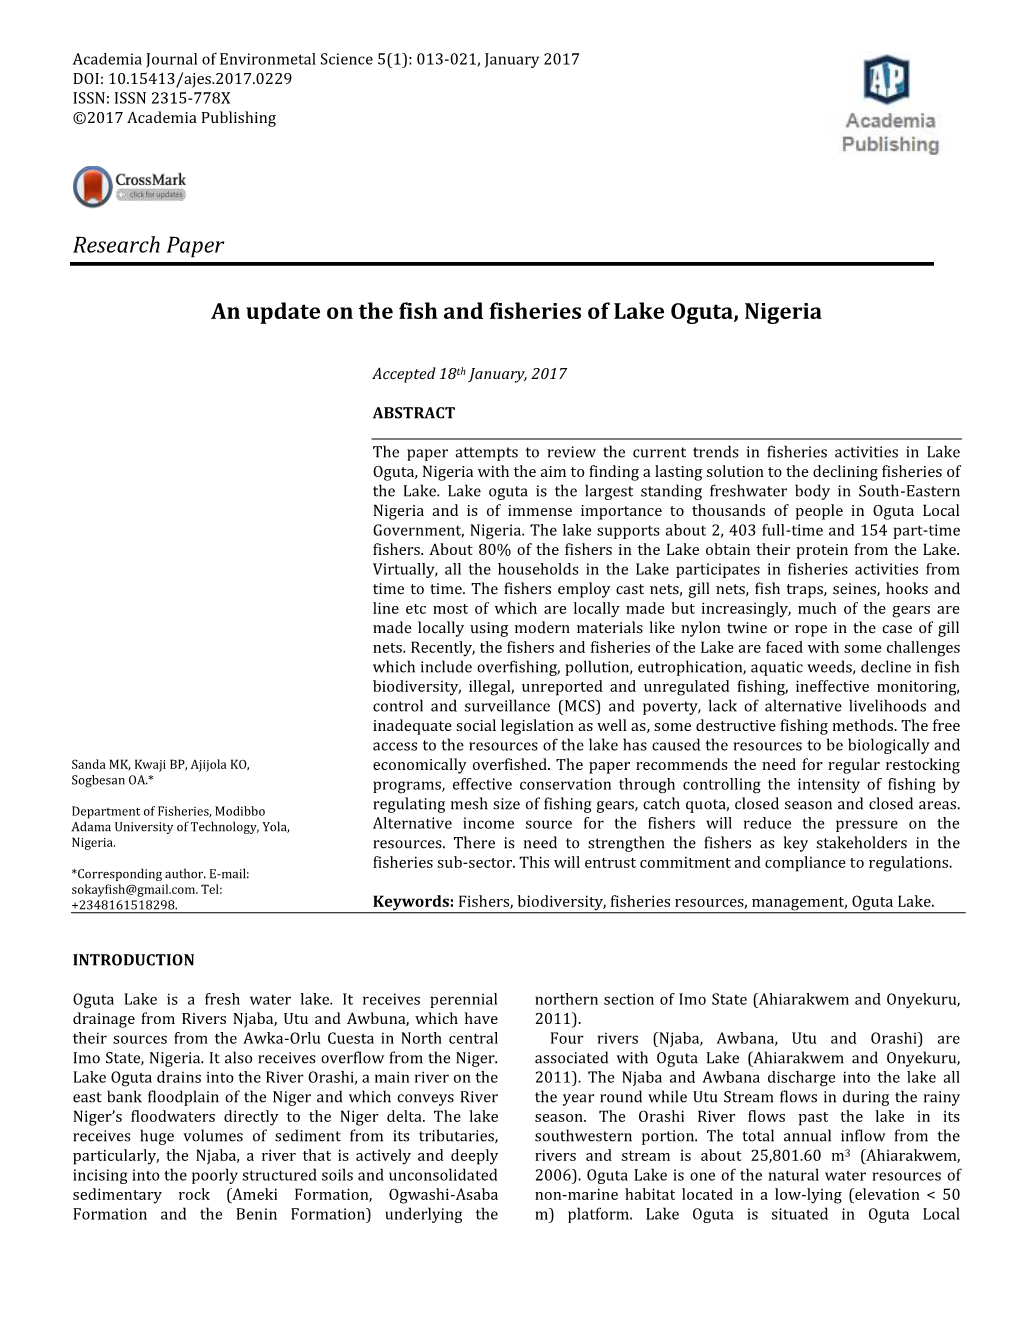 Research Paper an Update on the Fish and Fisheries of Lake Oguta, Nigeria